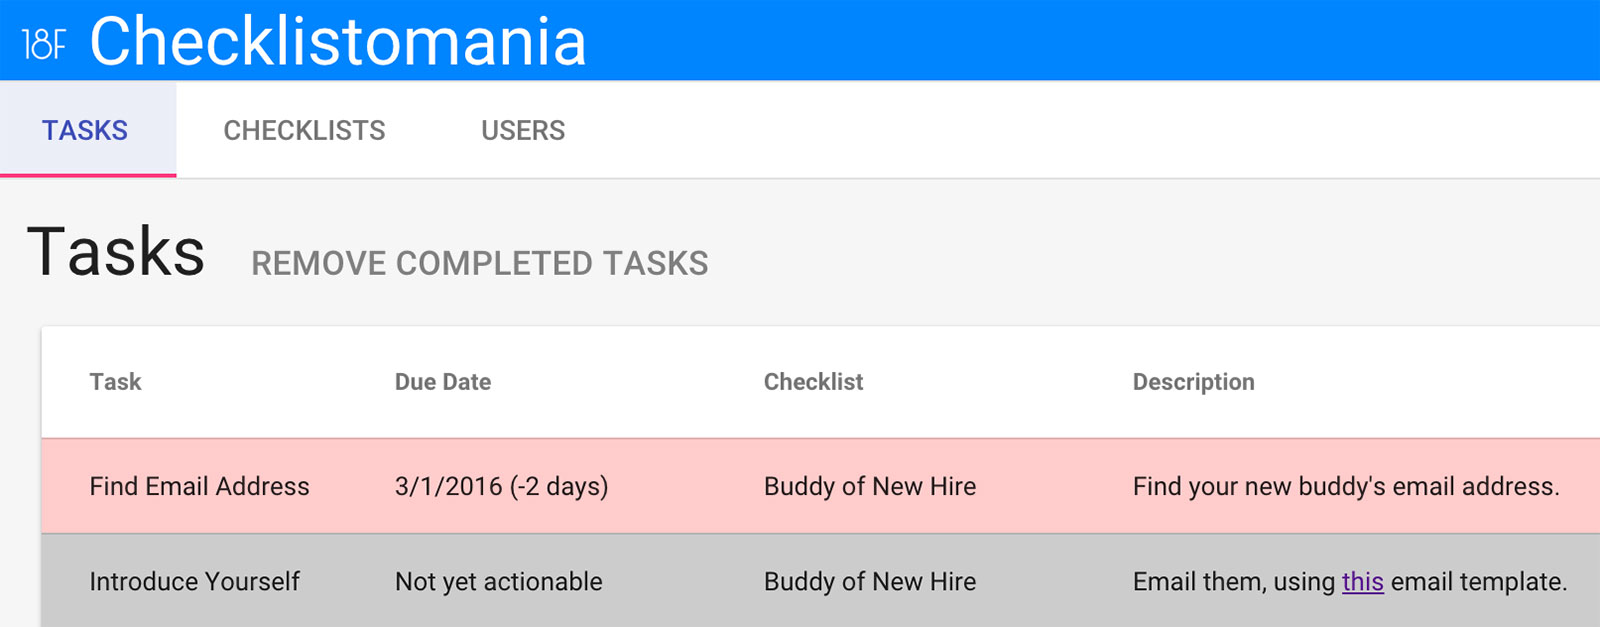 A screenshot of our Checklistomania tool showing two sample tasks